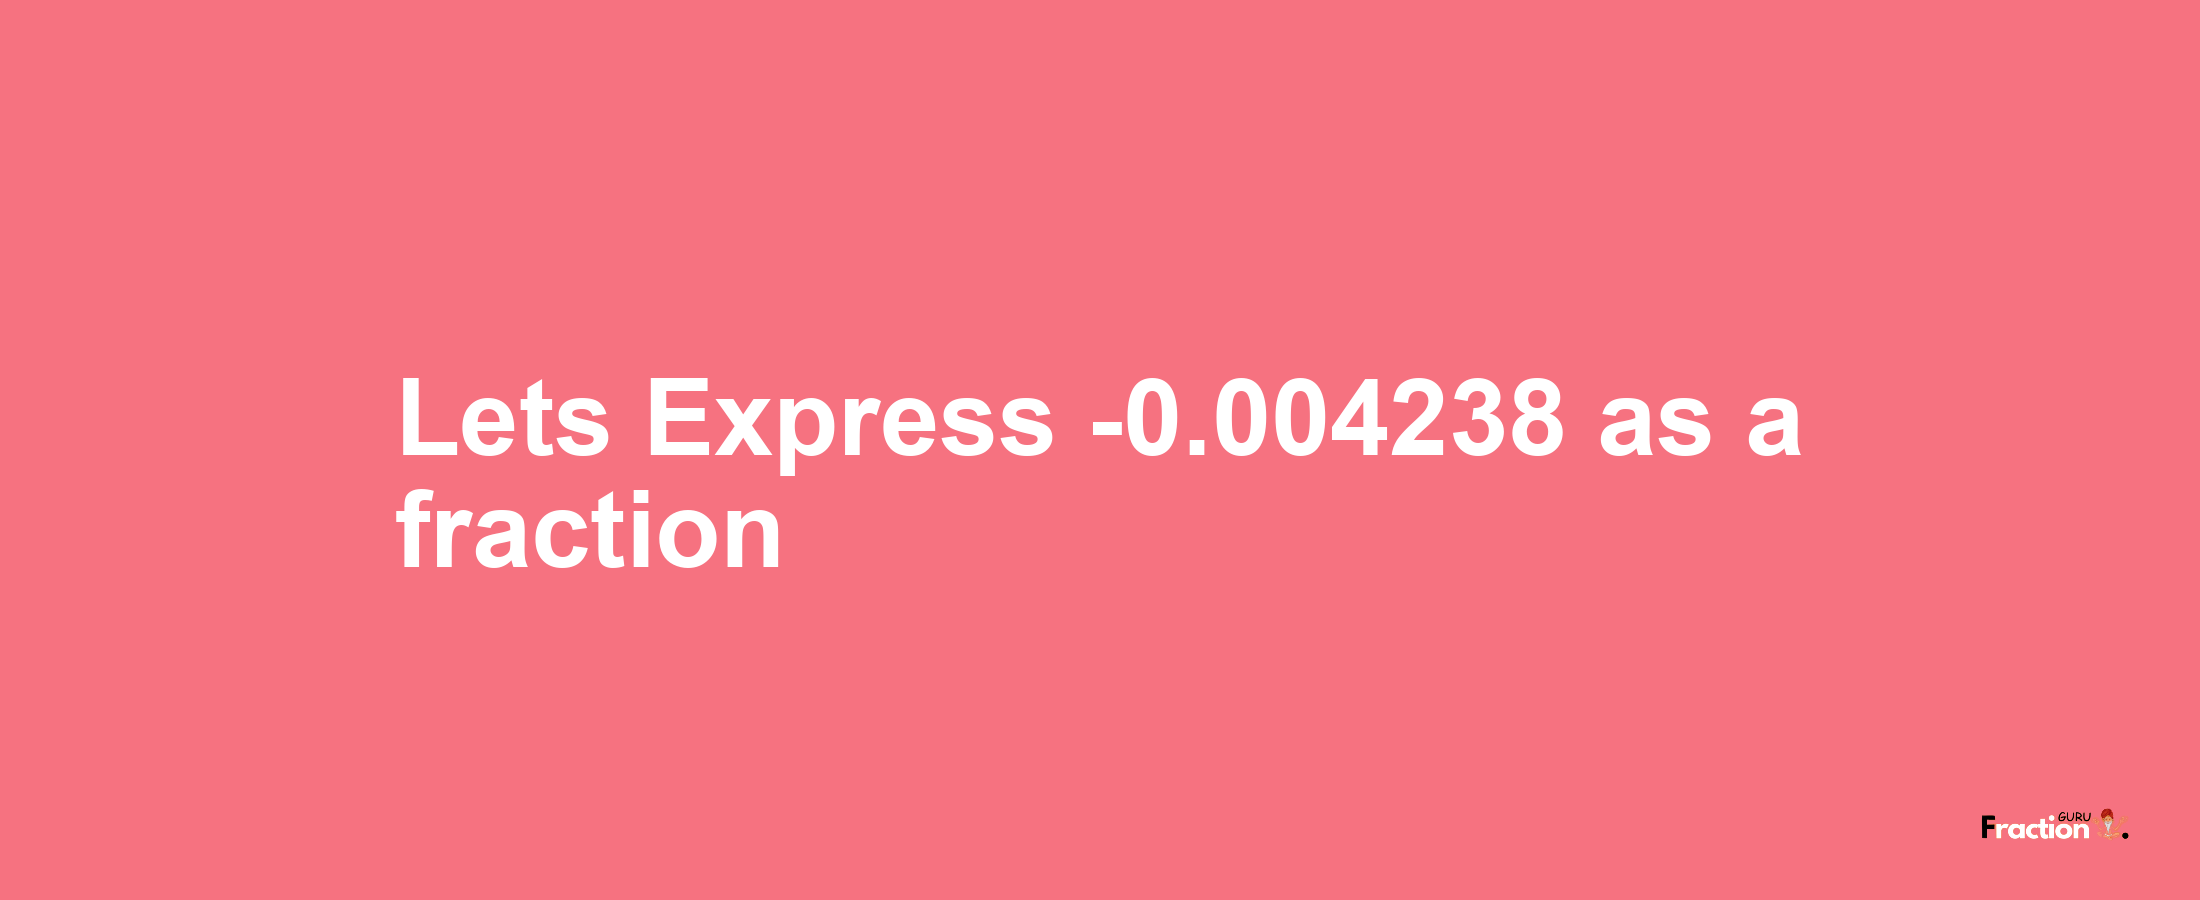 Lets Express -0.004238 as afraction